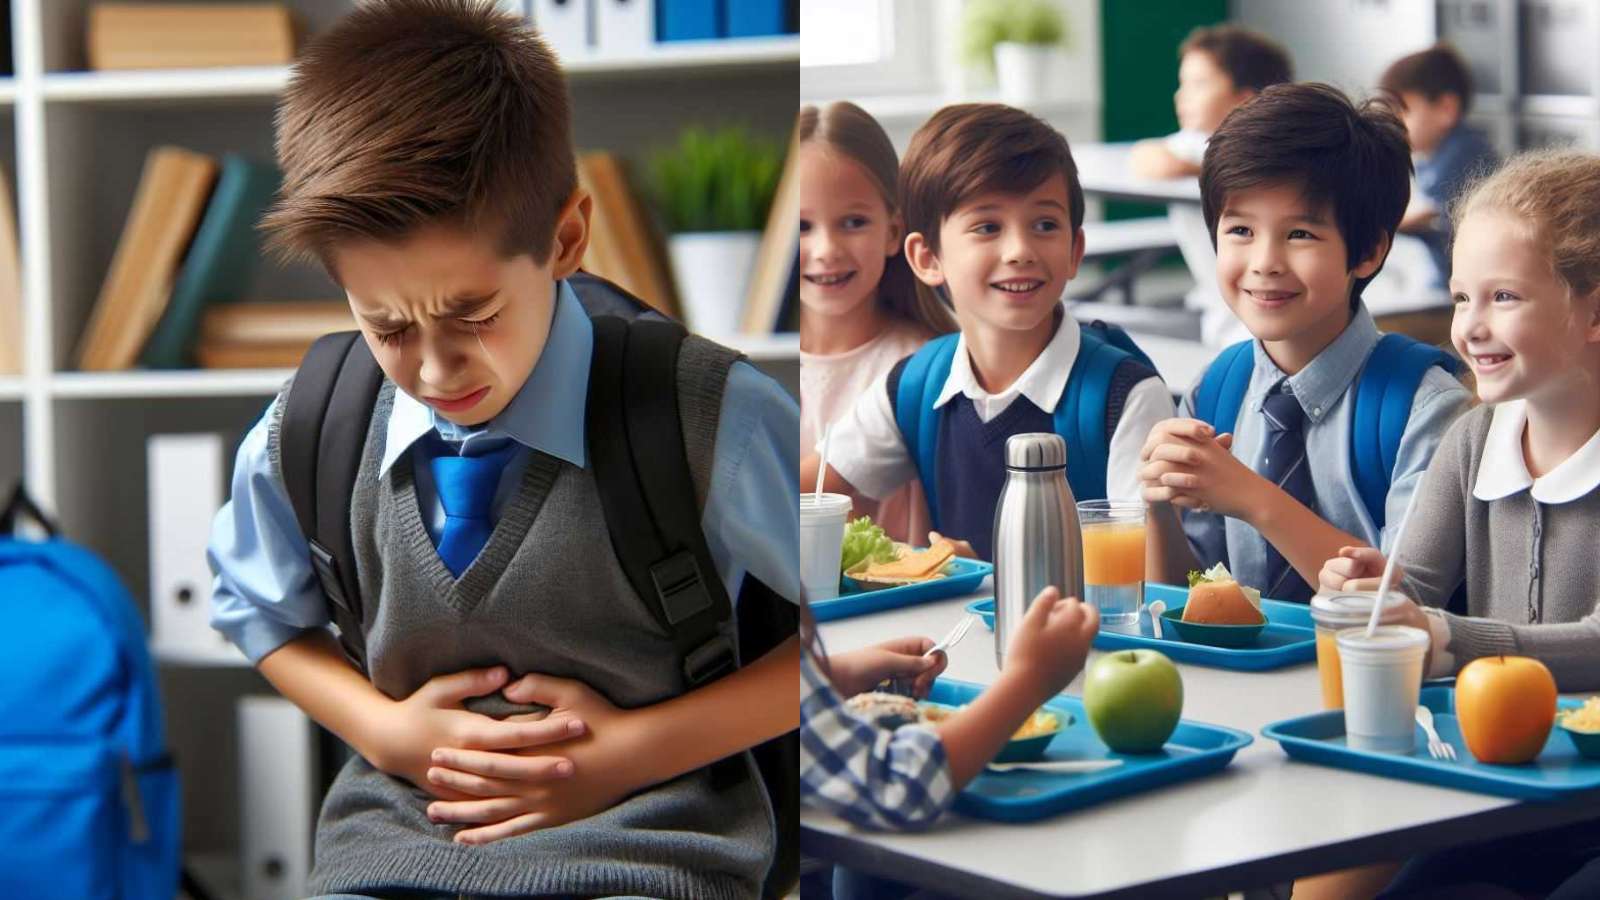 school bully falling ill as students eat lunch